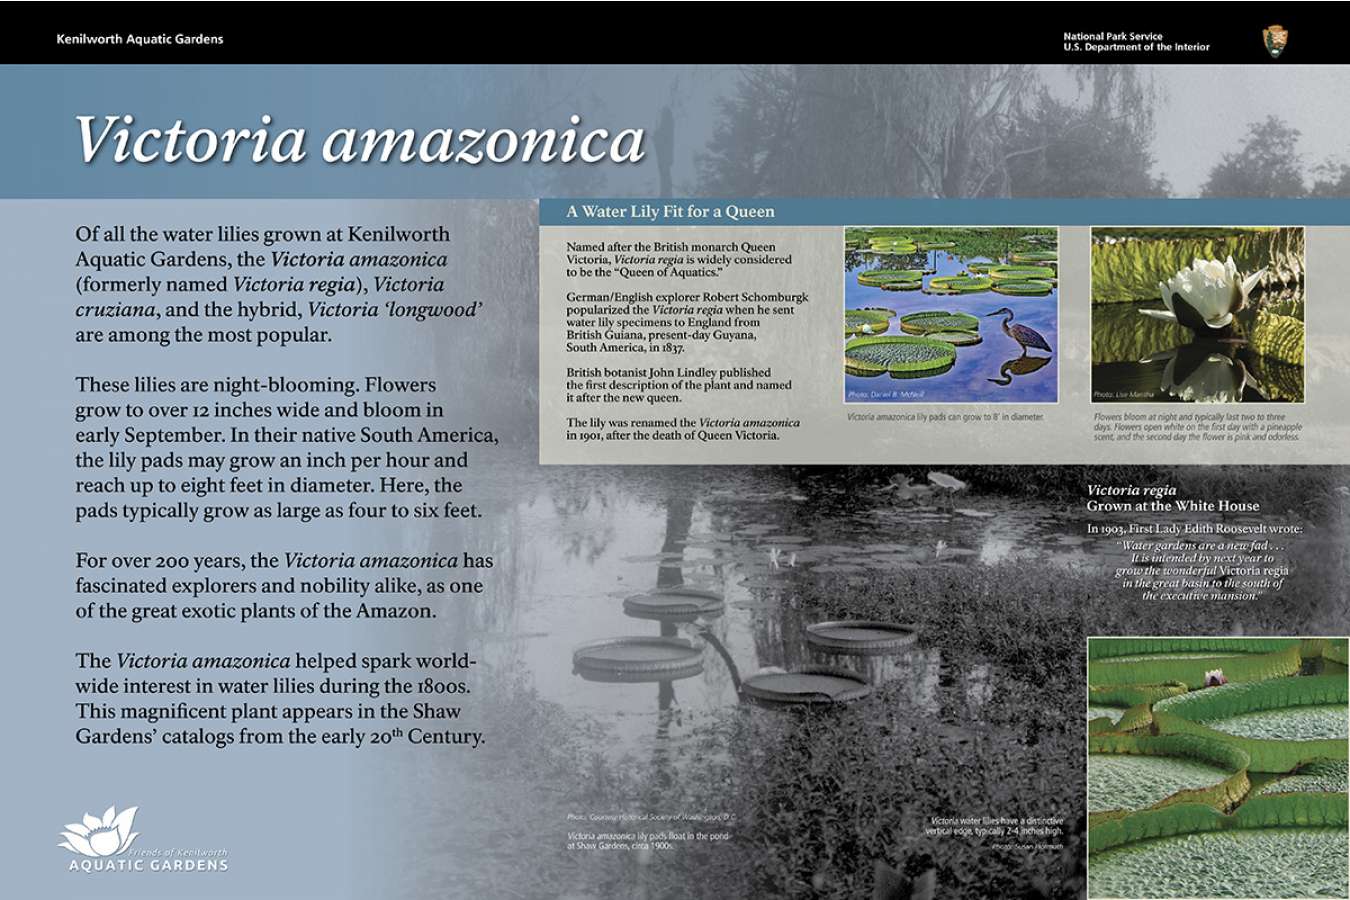 fokag 3 : The Victoria amazonica water lily was in Shaw gardens catalogs early in the 20th century.  